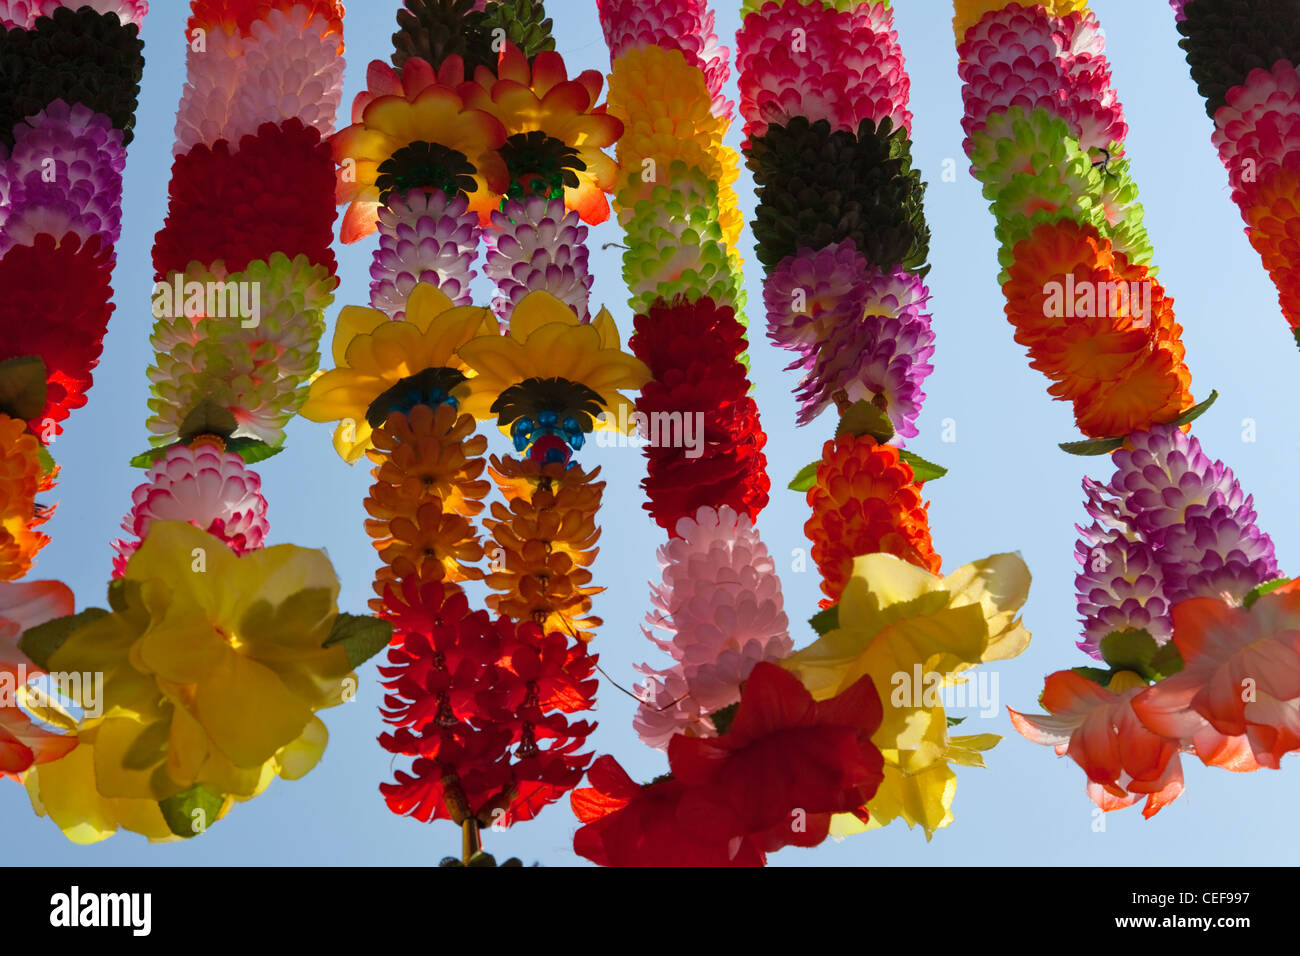 Colorful flower wreaths, decoration of Diwali, Festival of Lights, Jaipur, Rajasthan, India Stock Photo